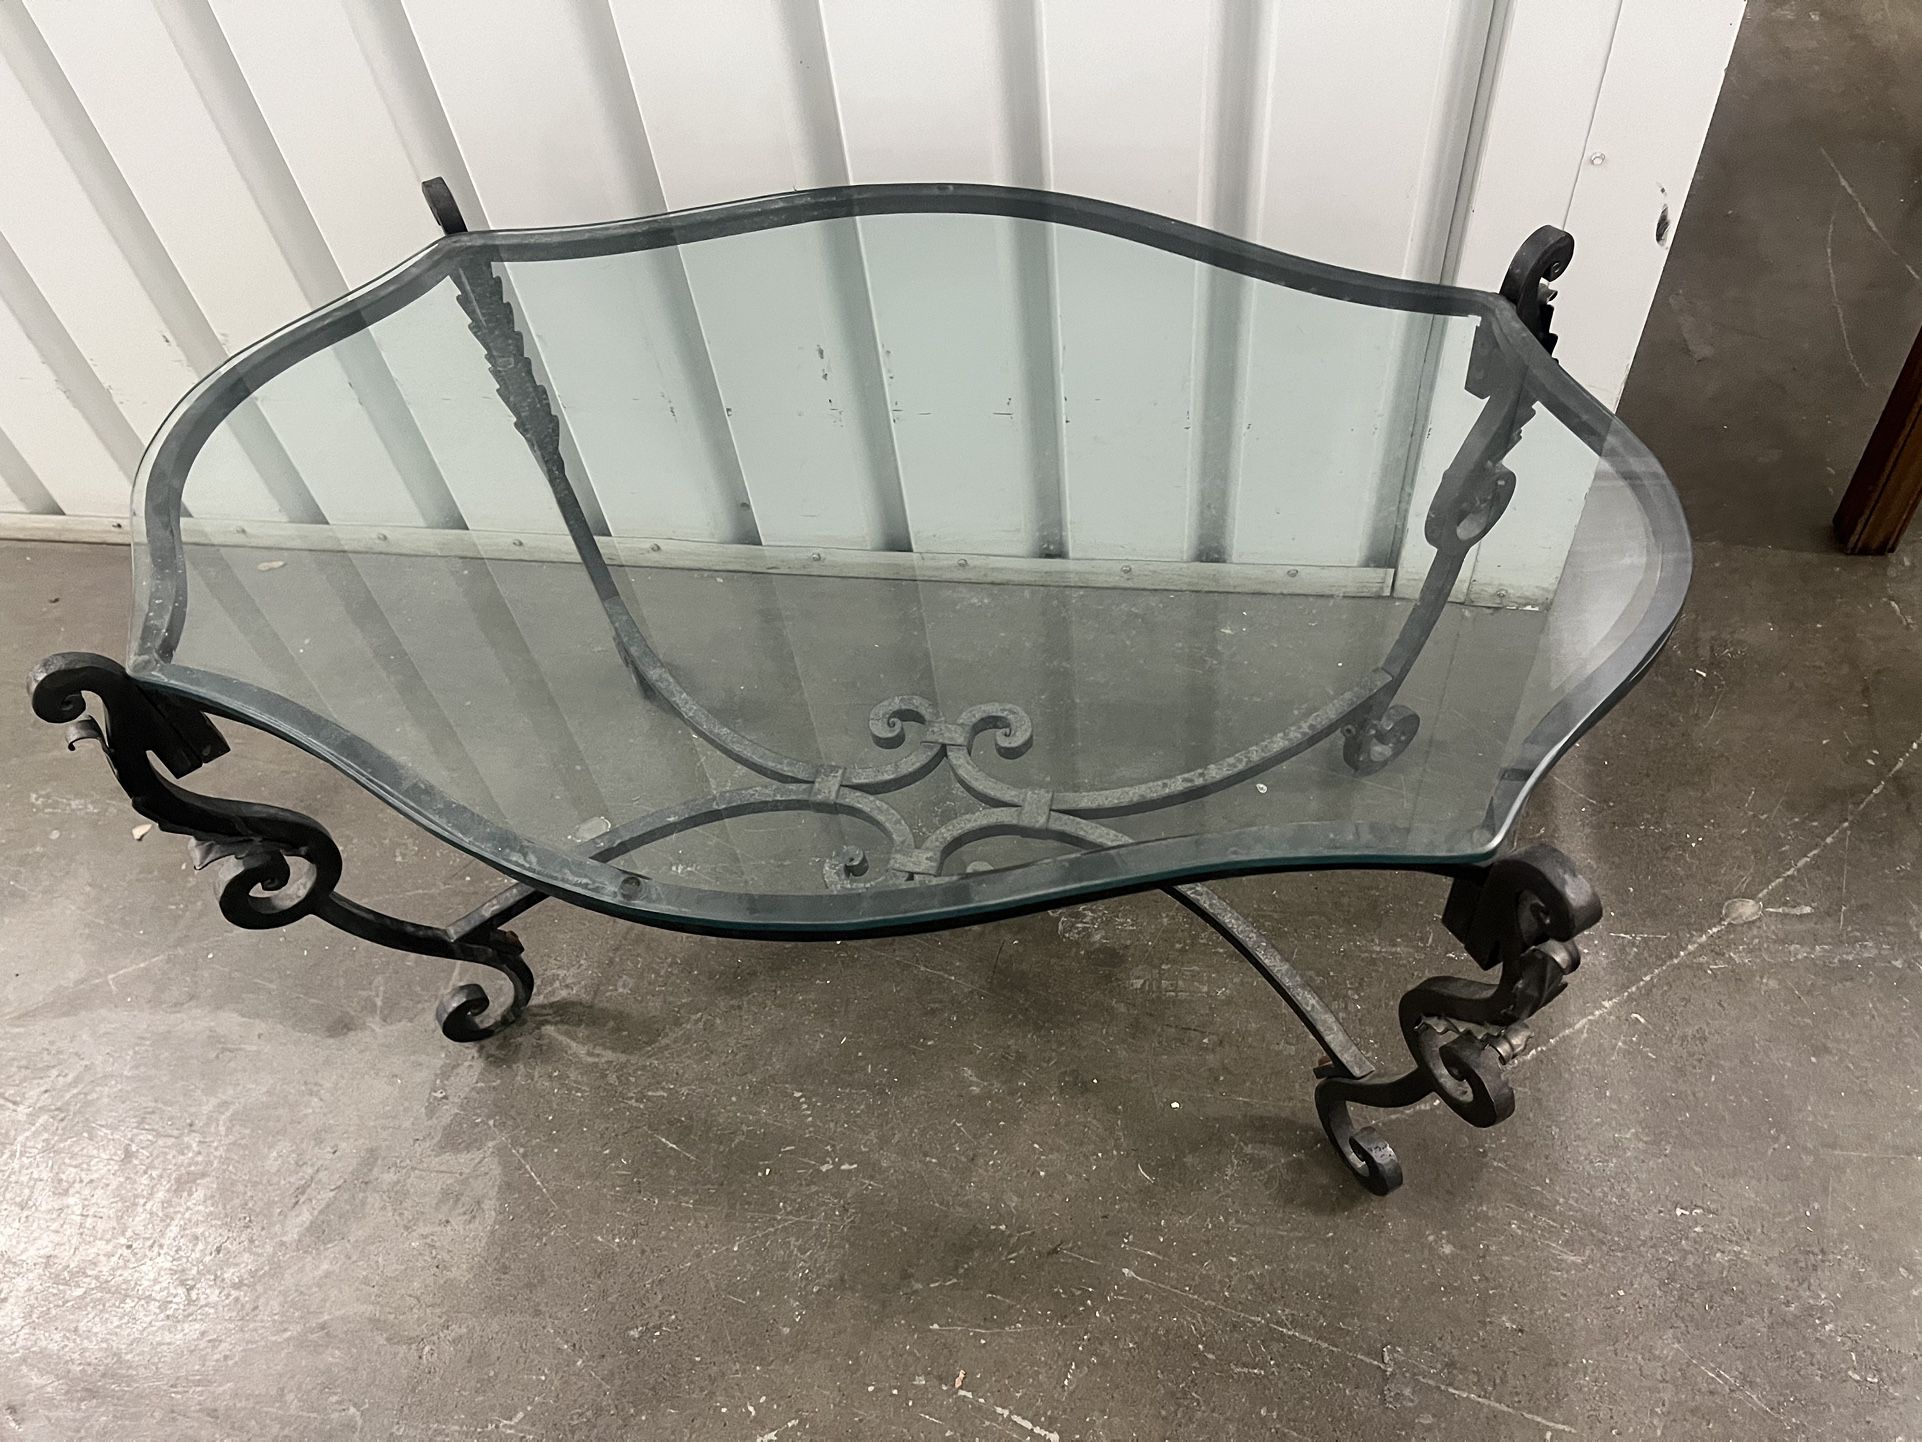 Vintage Bronze Cast Iron Outdoor Or Indoor Table With Glass Top